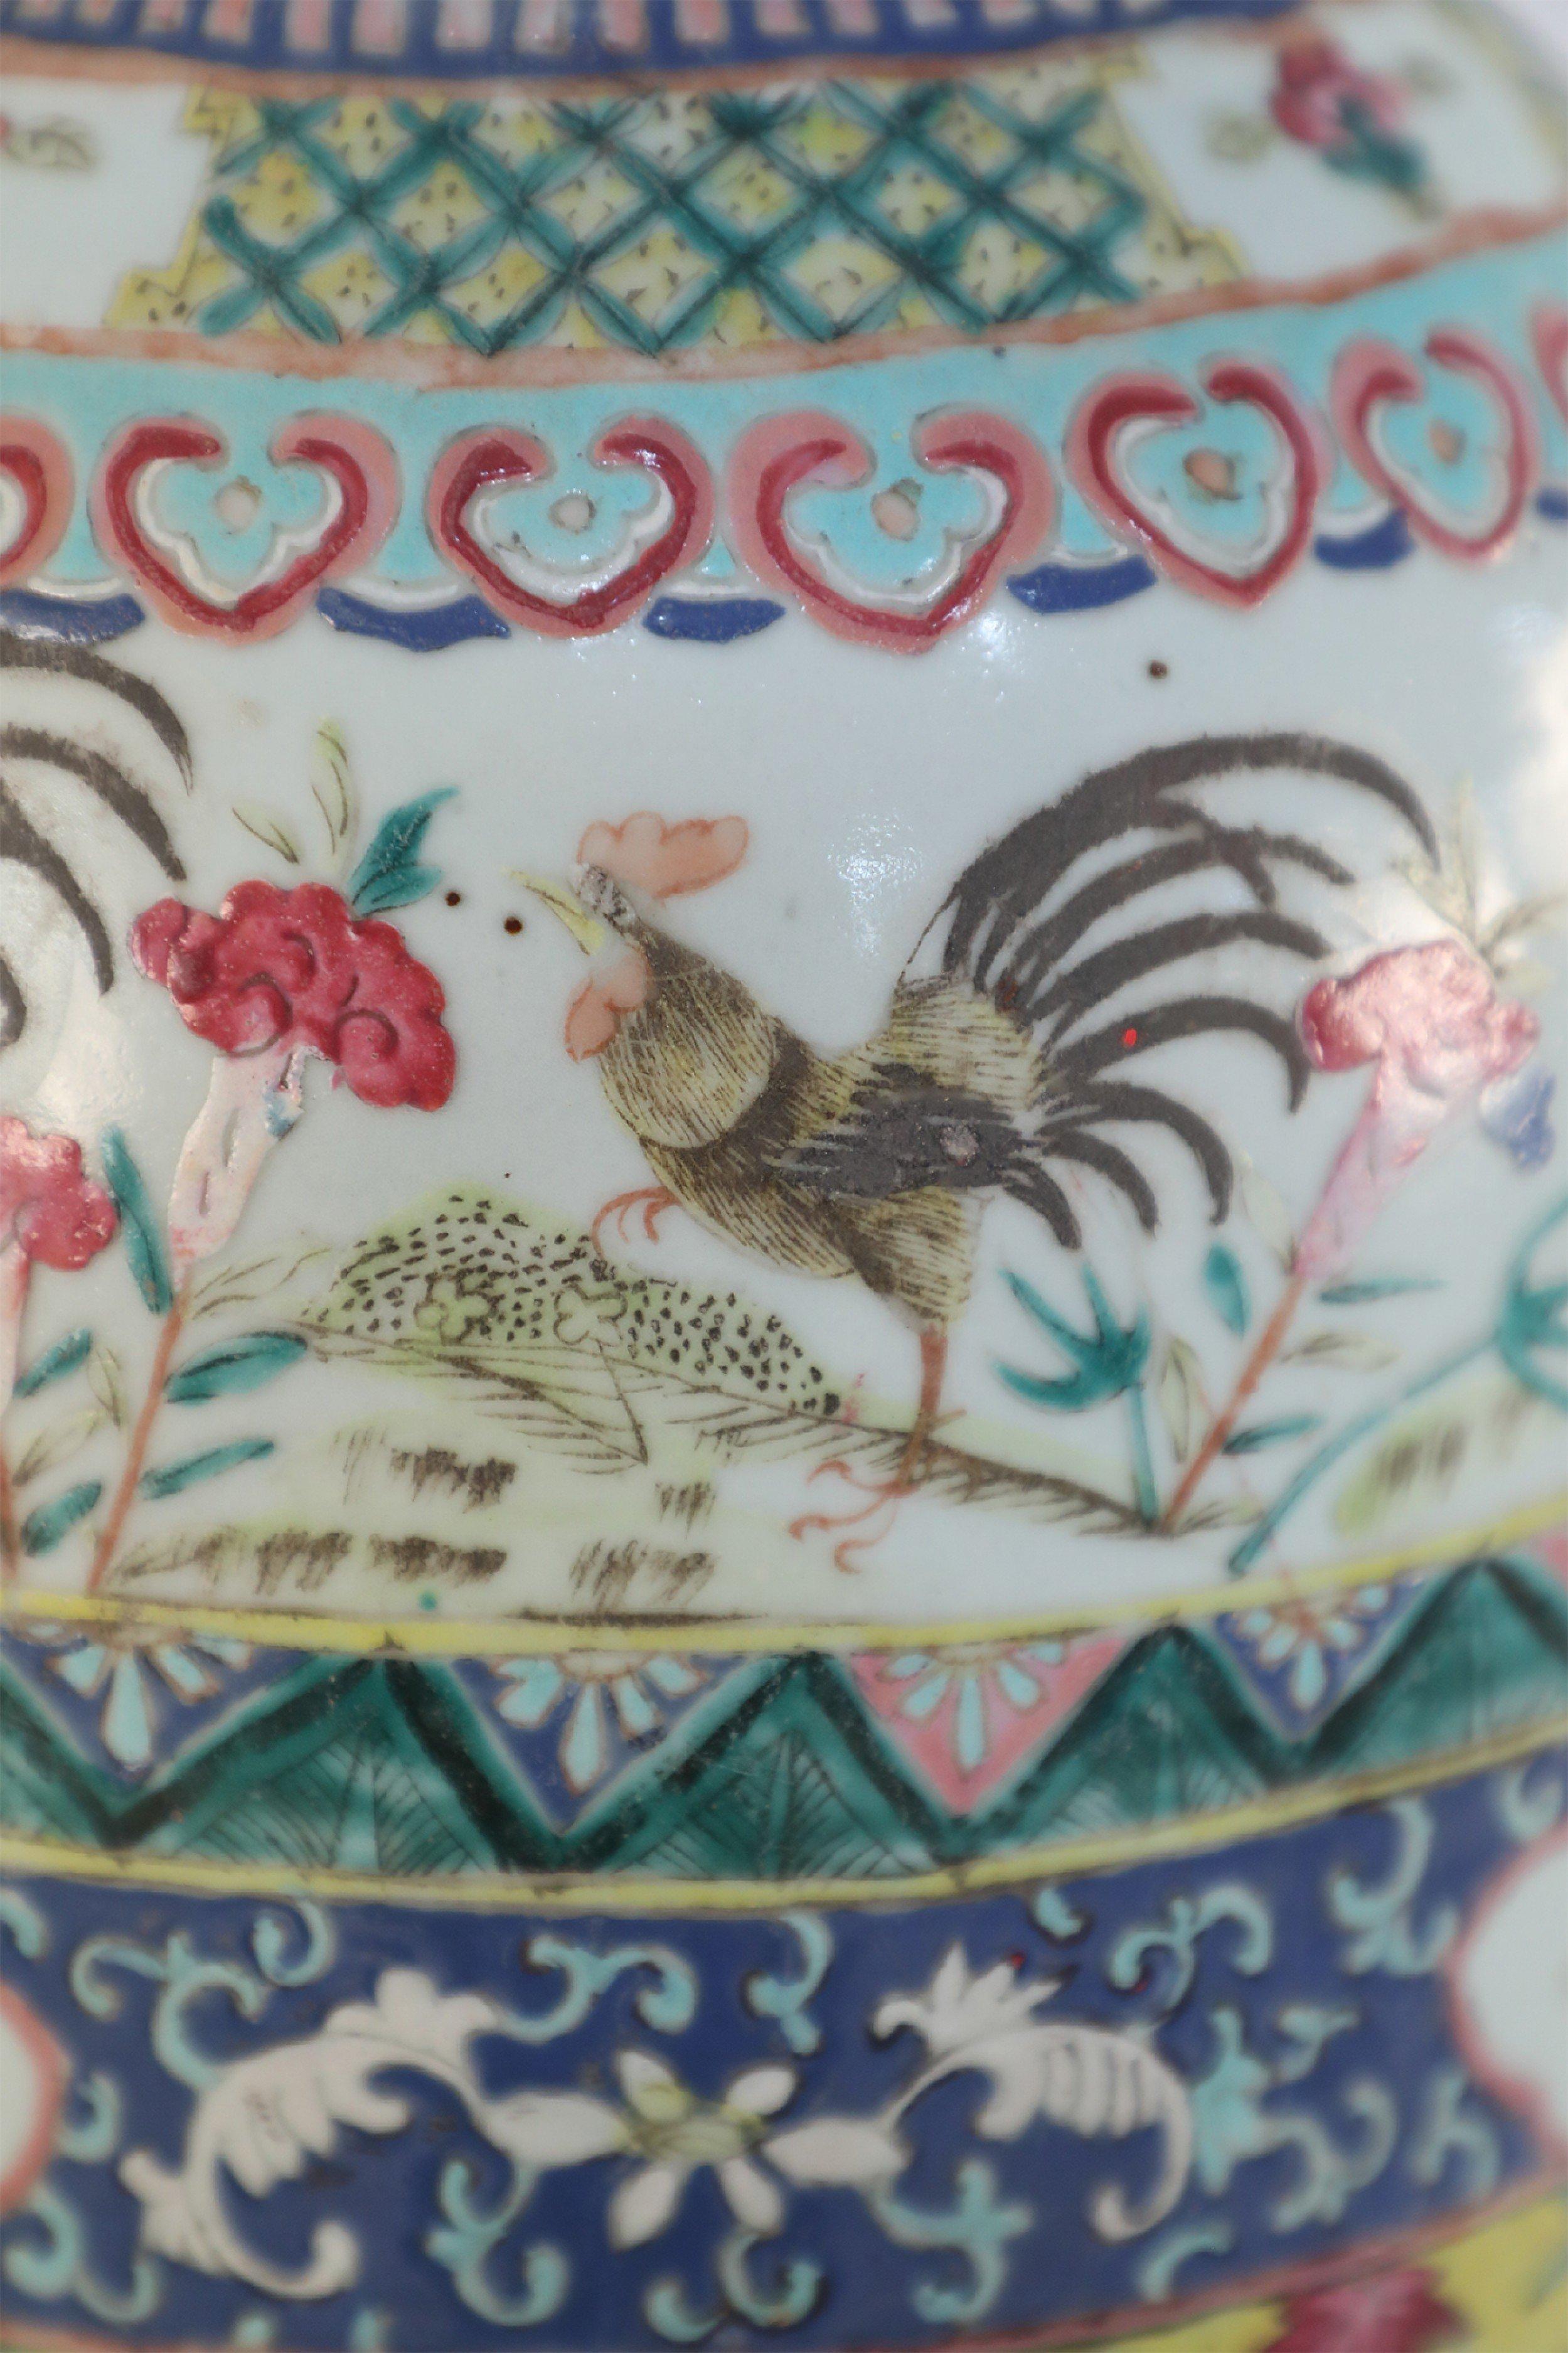 Antique Chinese (Late 19th Century) porcelain urn wrapped in a variety of patterned bands, including florals, roosters, and geometric patterns in pink, green, blues and yellows.
 